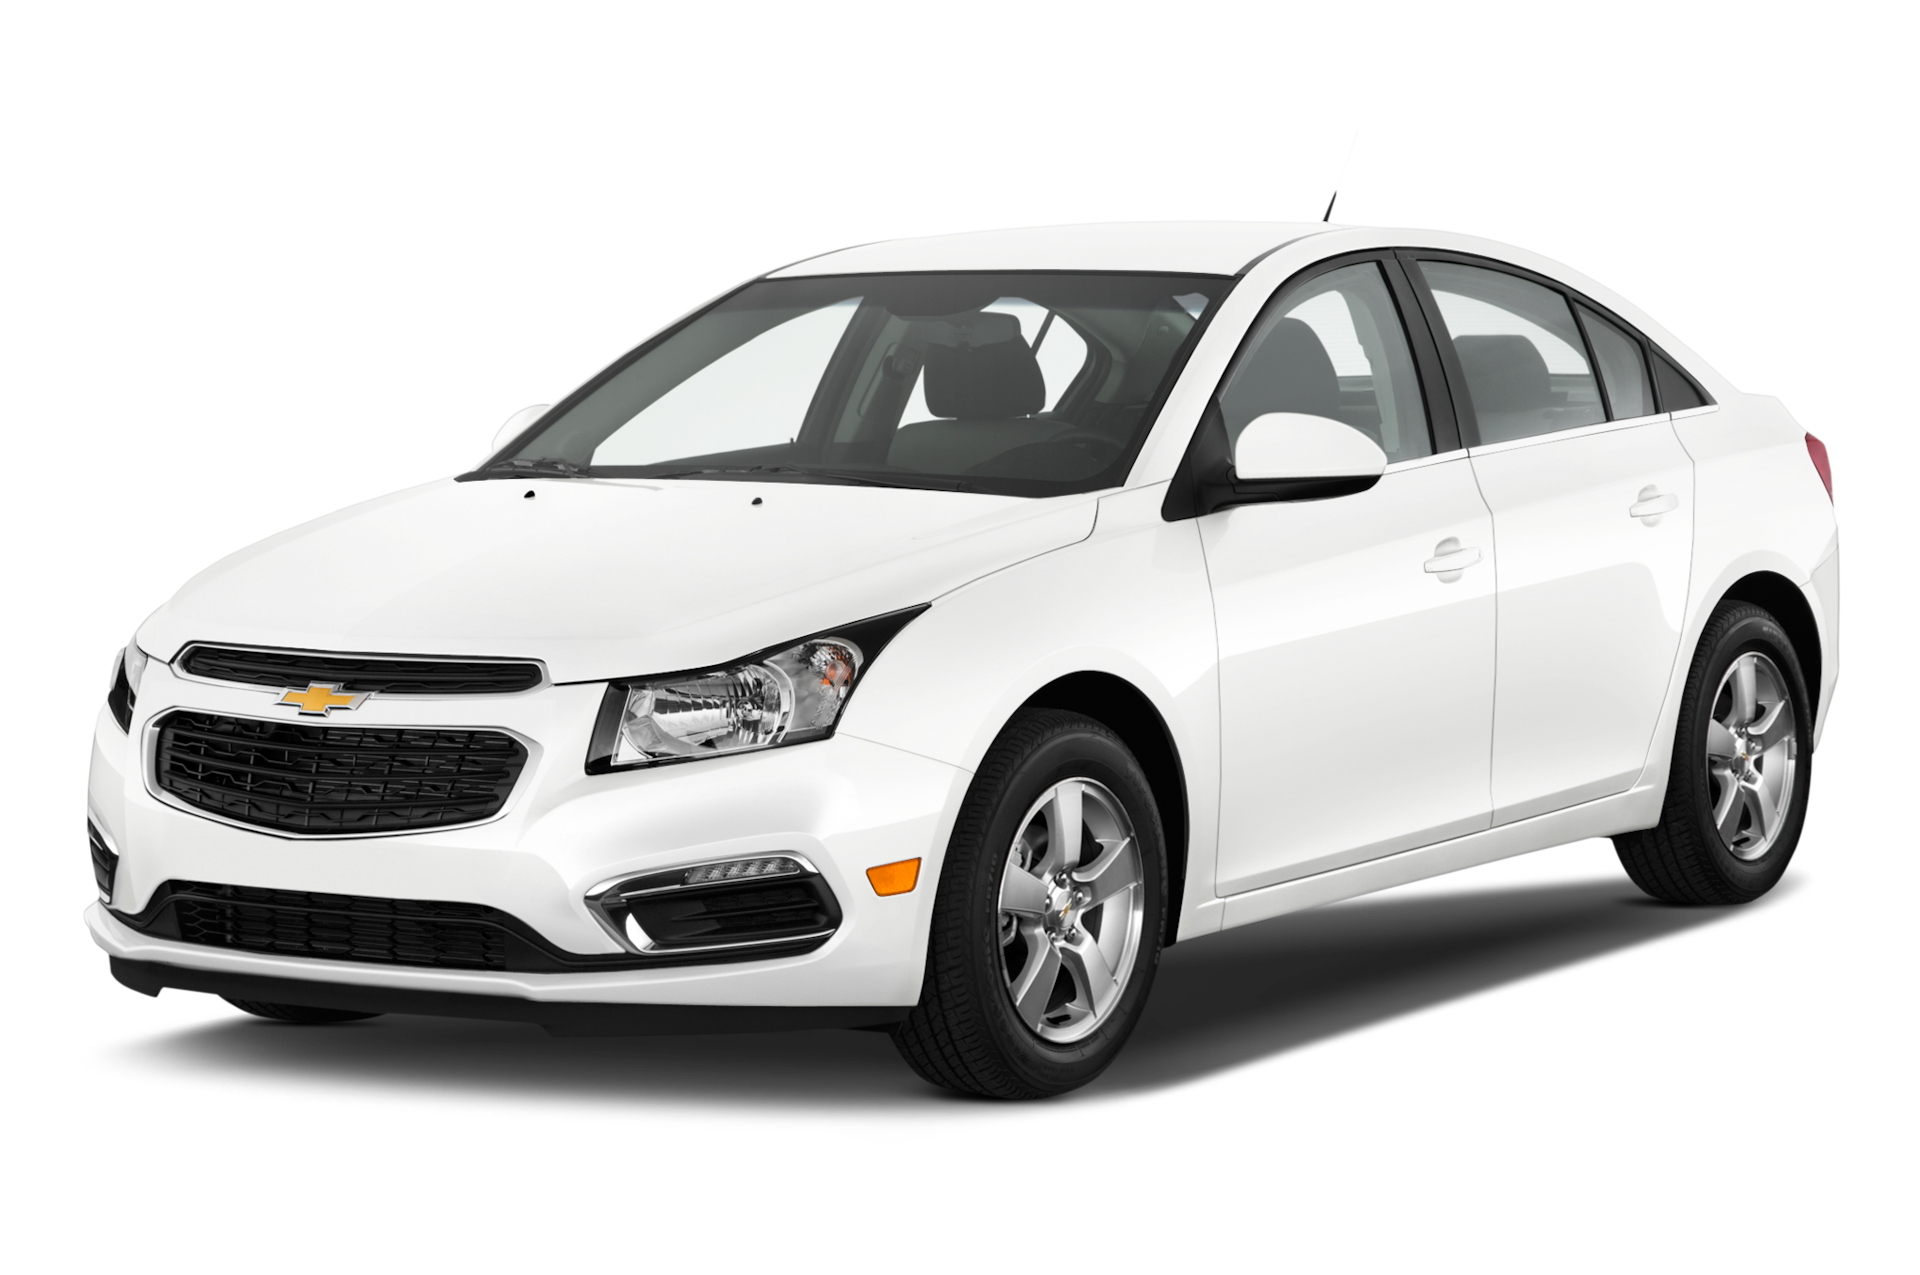 2015 Chevrolet Cruze Prices, Reviews, and Photos - MotorTrend